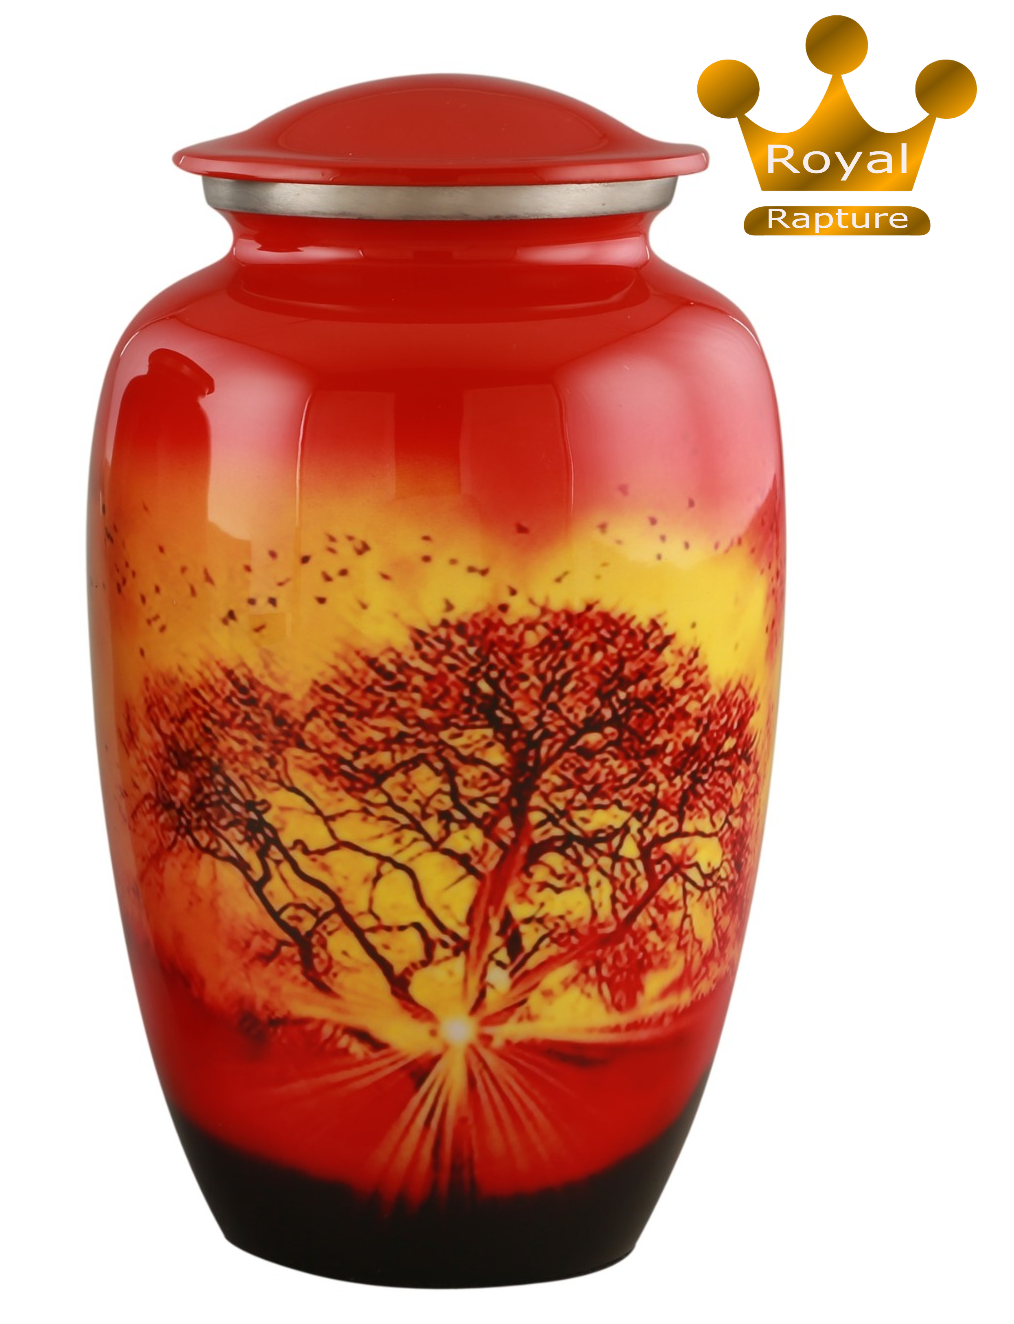 Cremation Urns for Males - Commemorative Cremation Urns